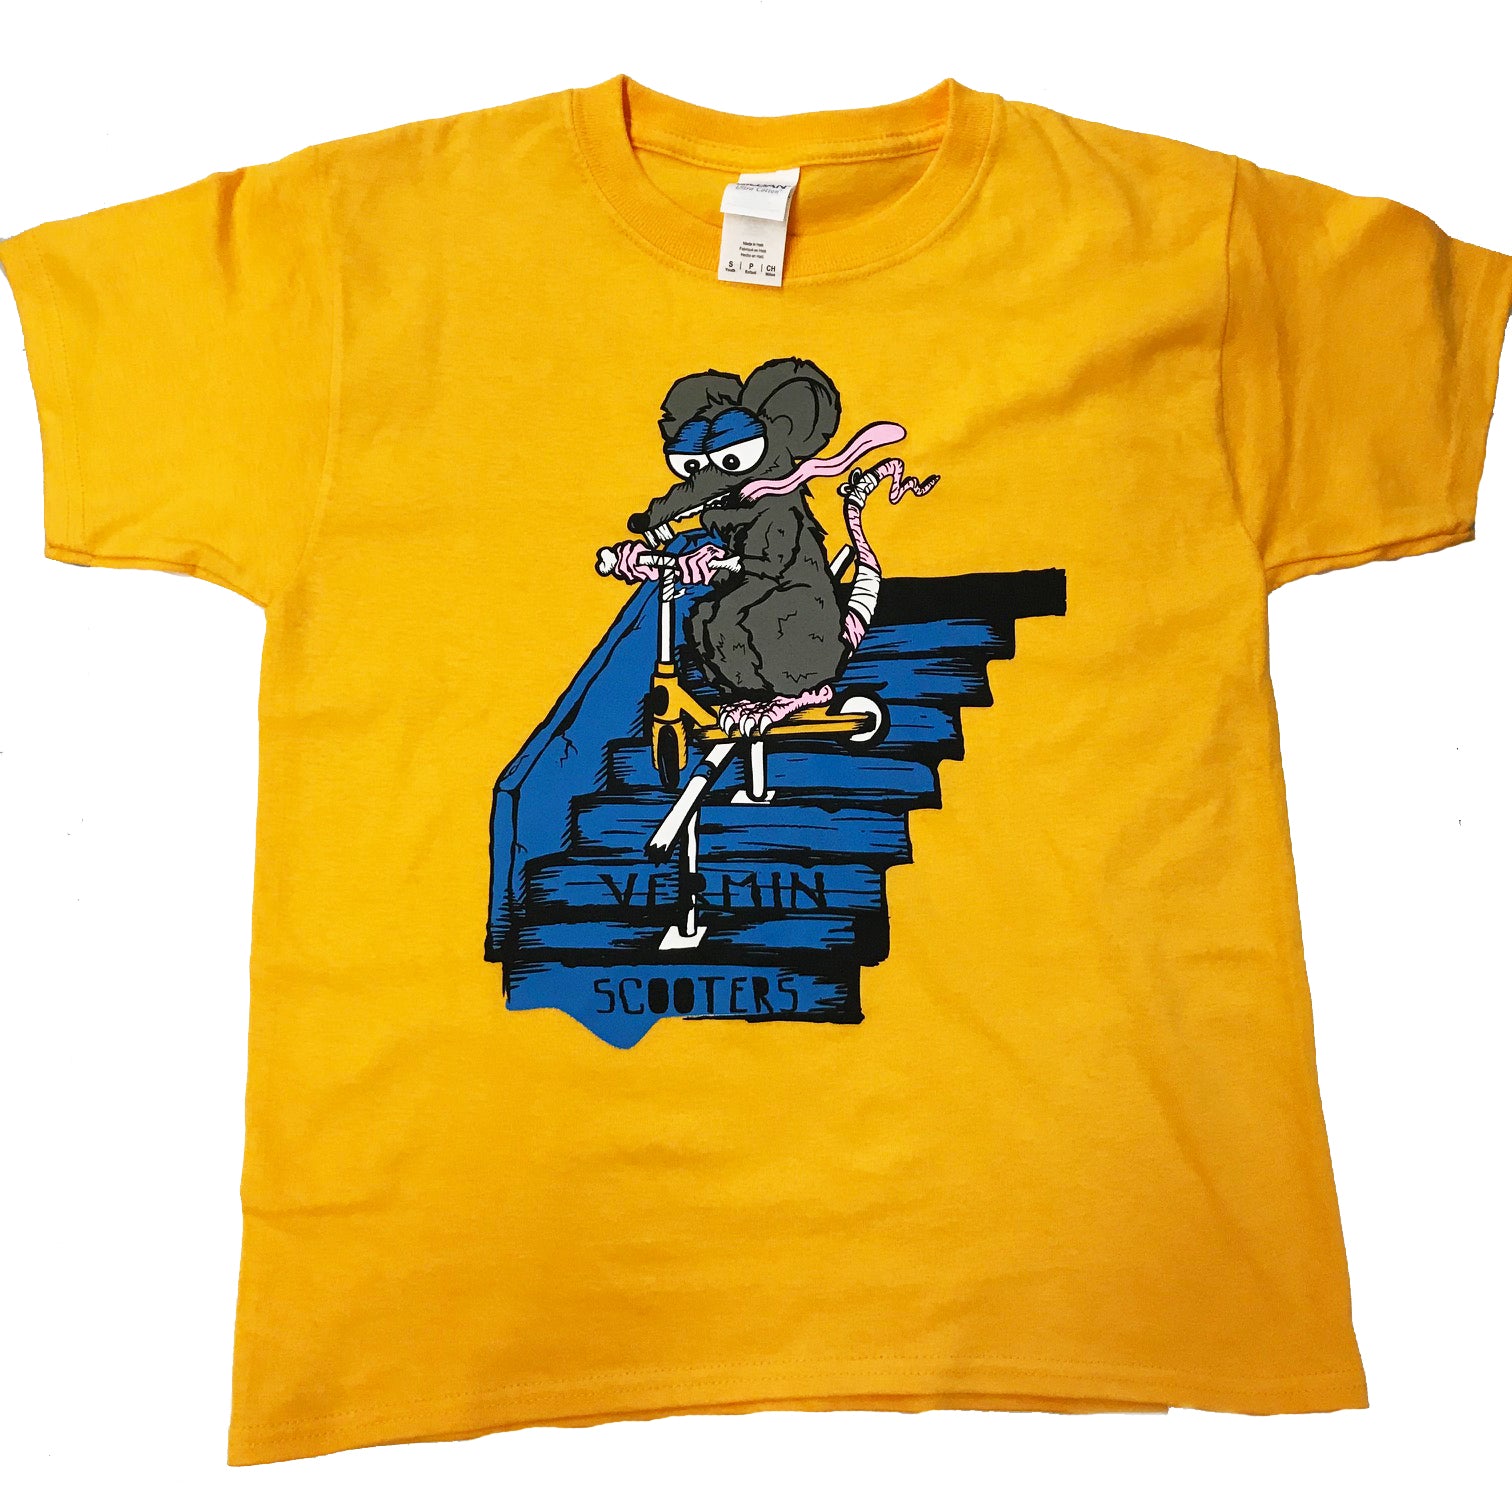 VERMIN SCOOTER T-SHIRTS - STAIRZ YELLOW